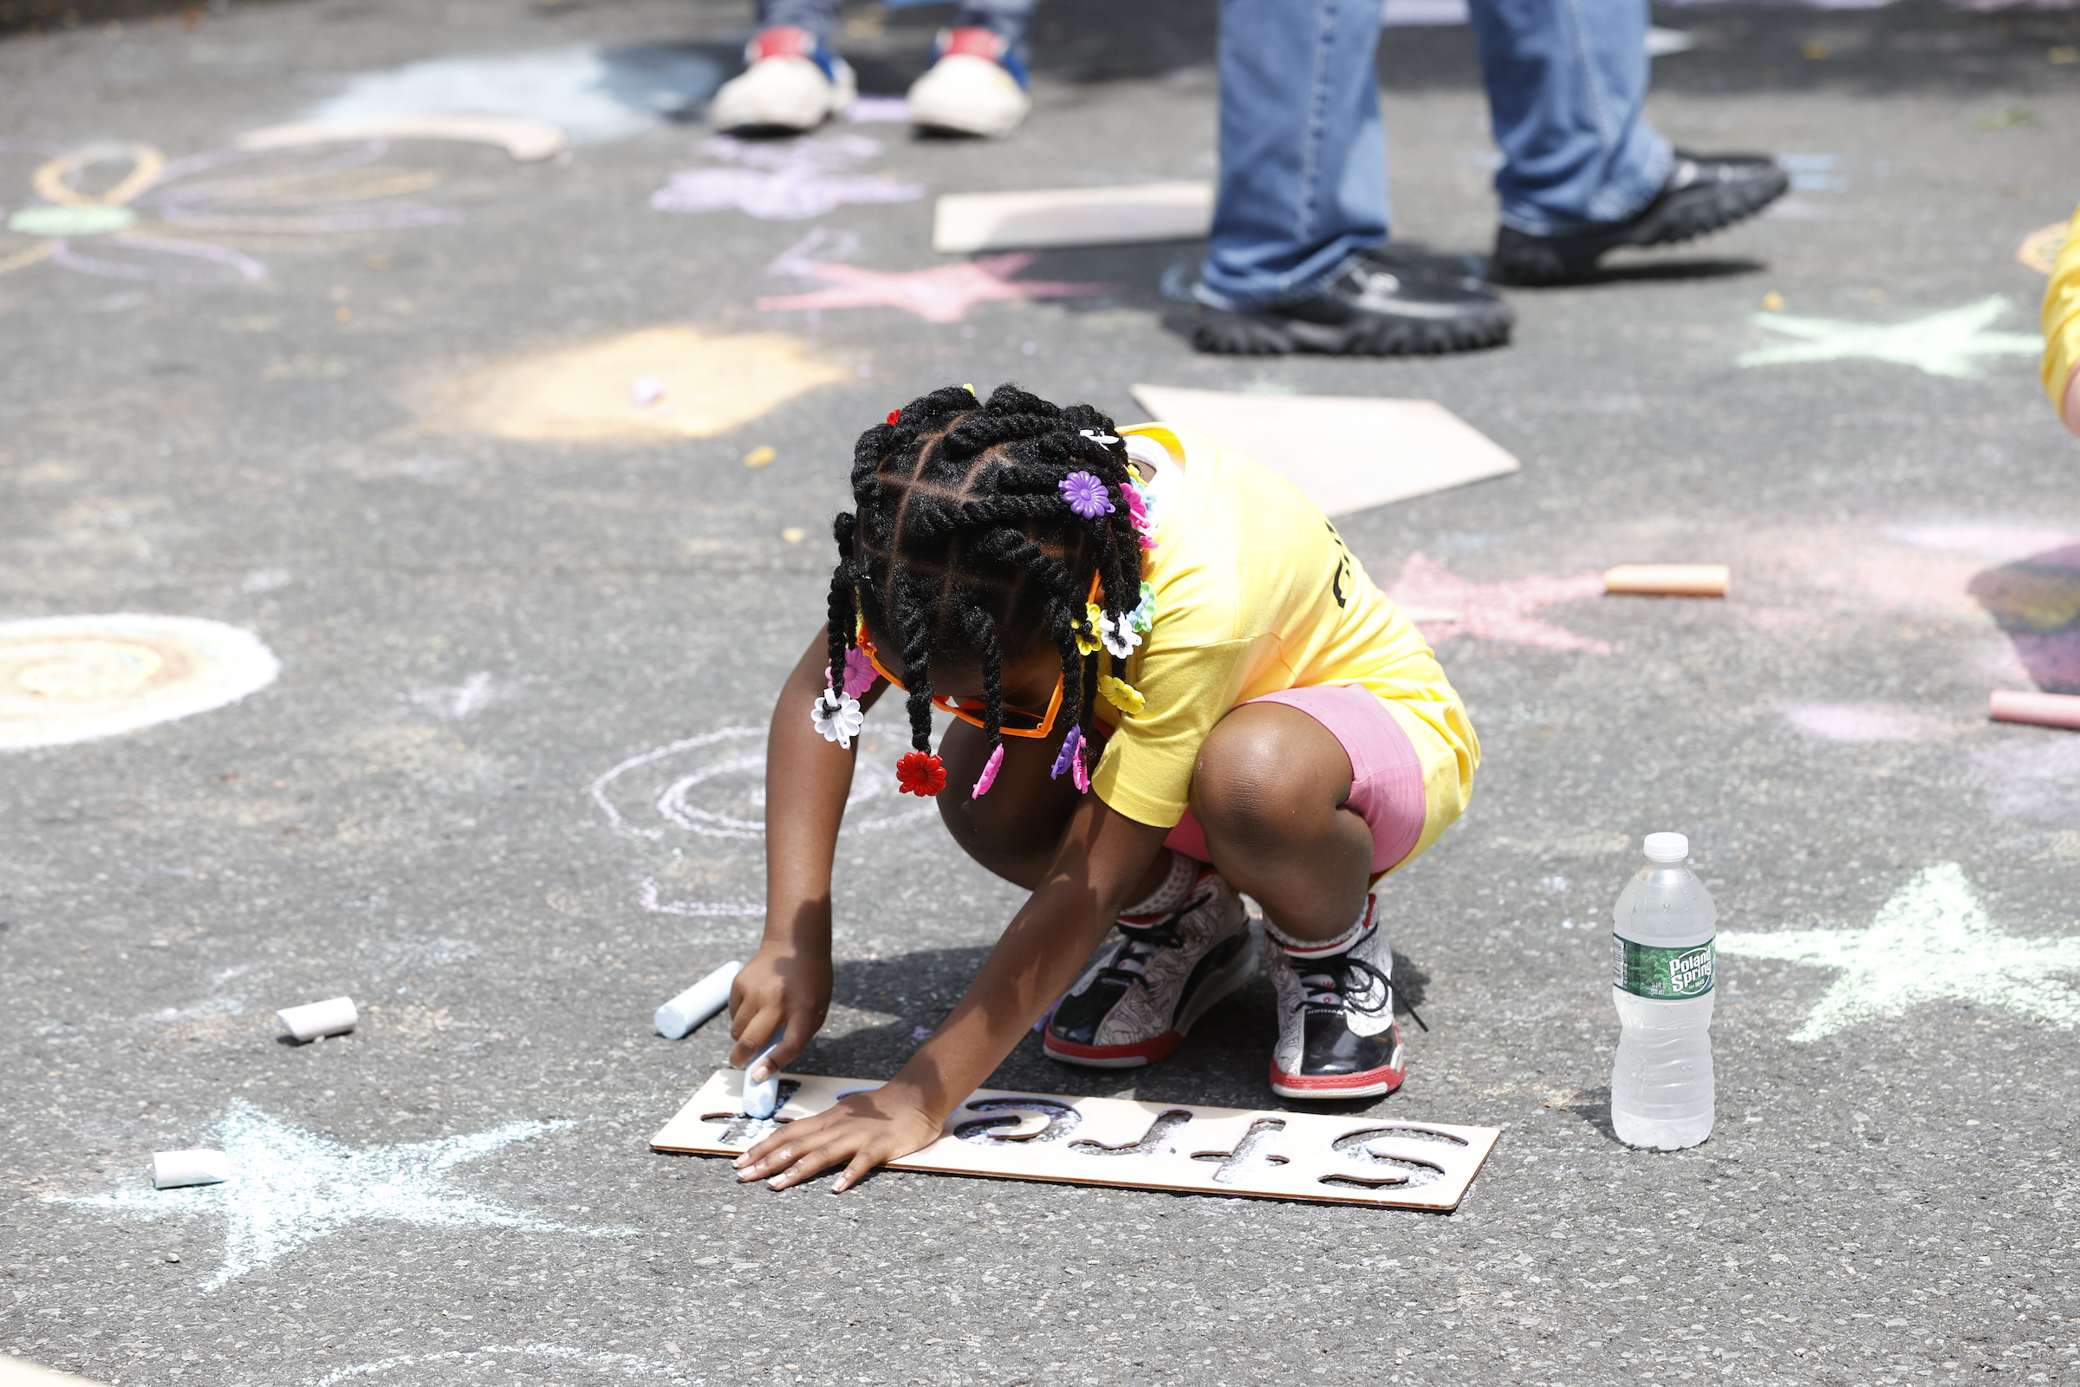 A child chalking on the street.